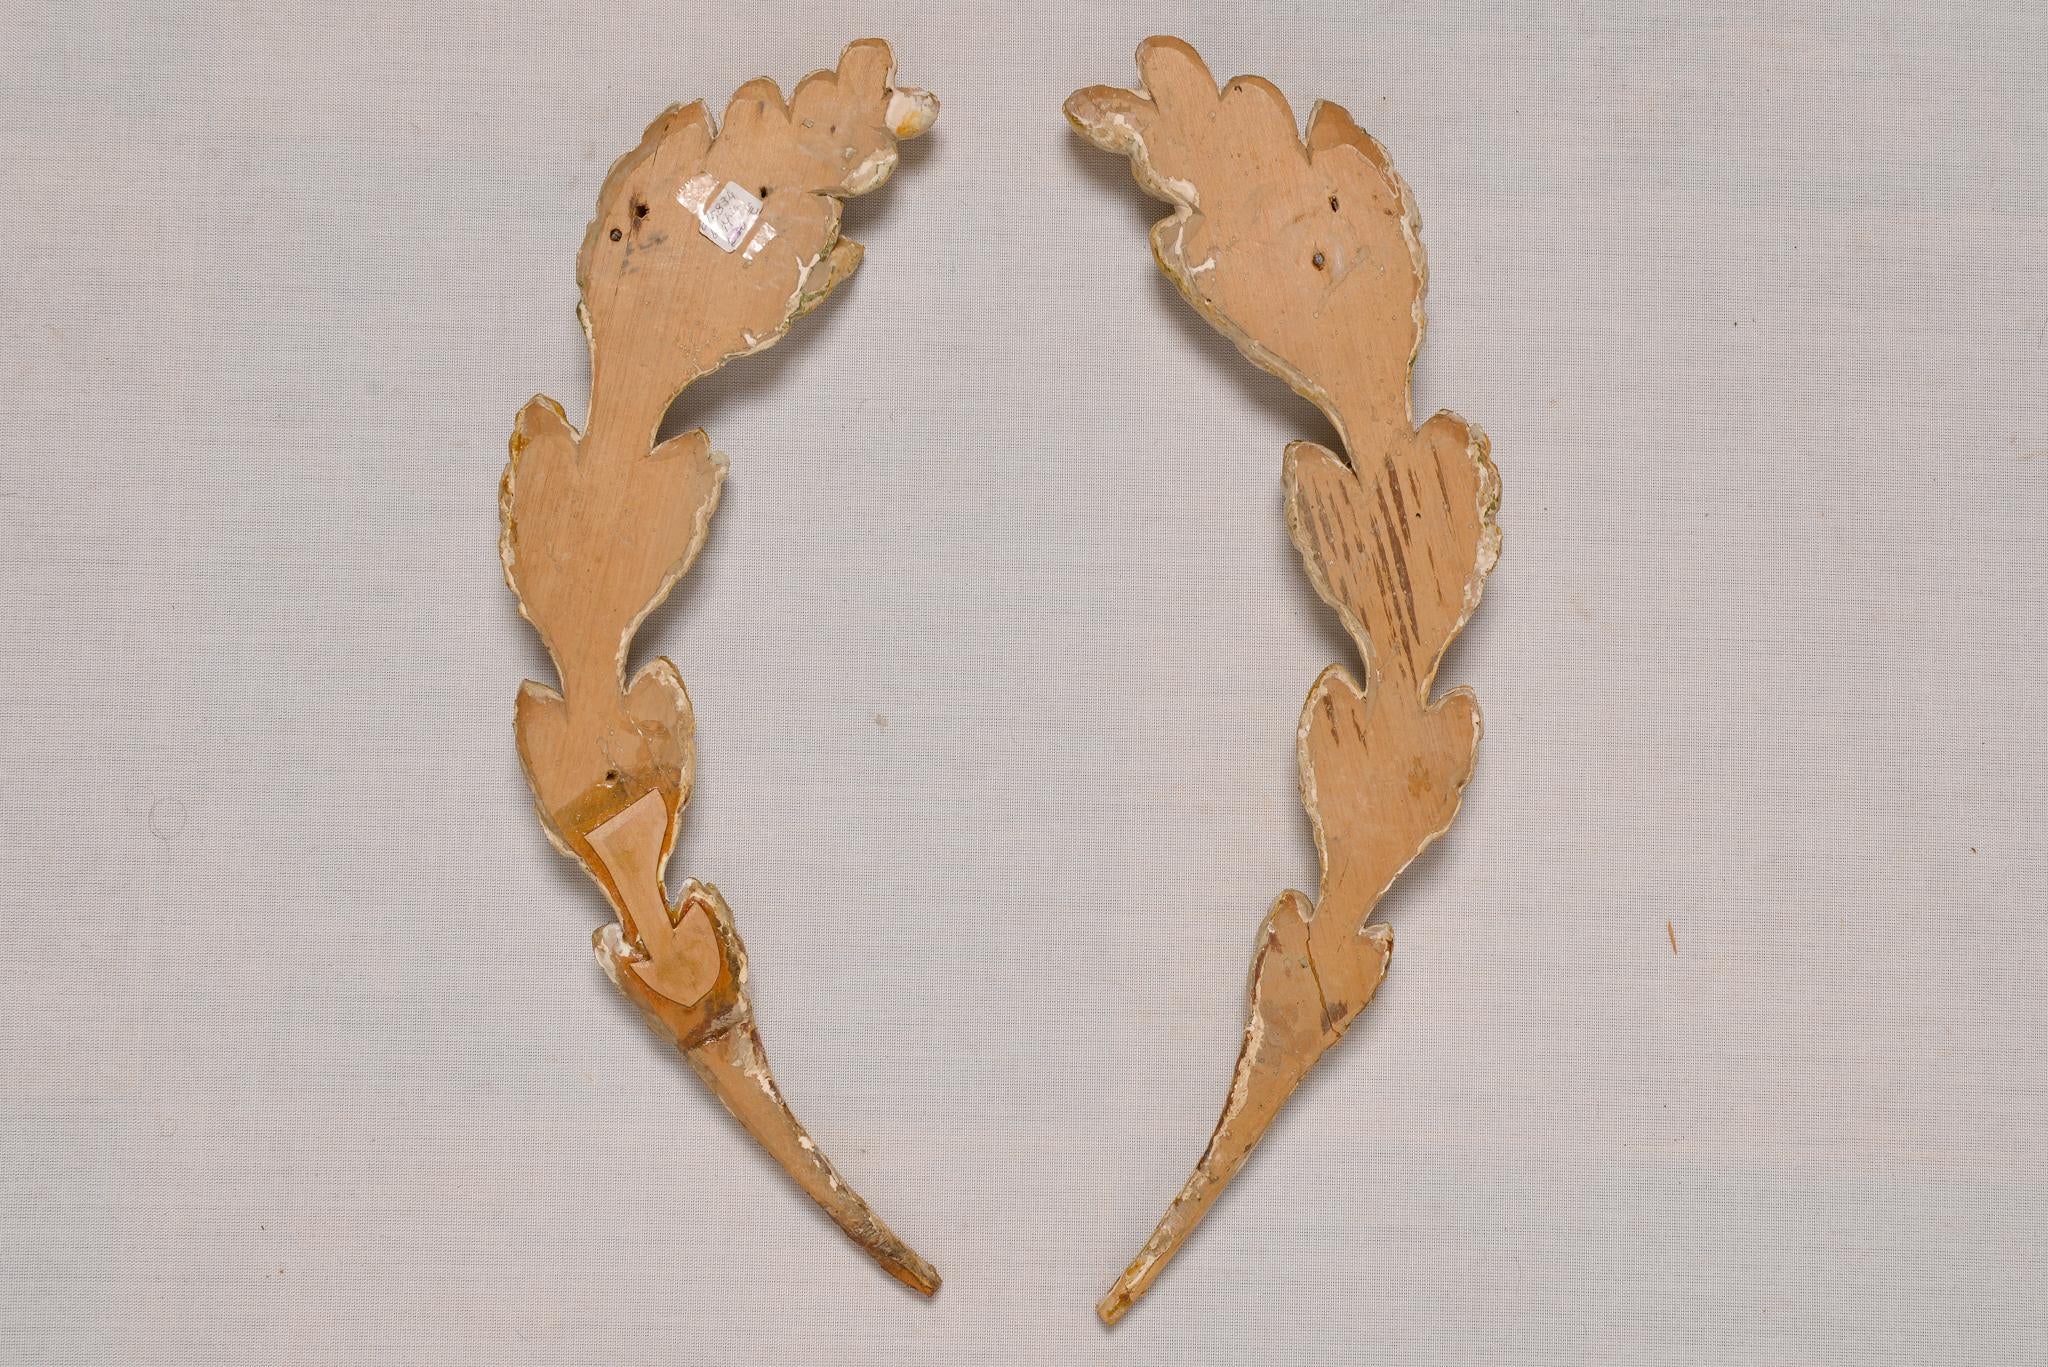 O/5834 - Pair of thin antique wooden friezes with golden berries. It's not easy to find these antique friezes because they are always broken or without details in gold. They are so elegant ! They can adorn any wall or sconces.
They can be also two